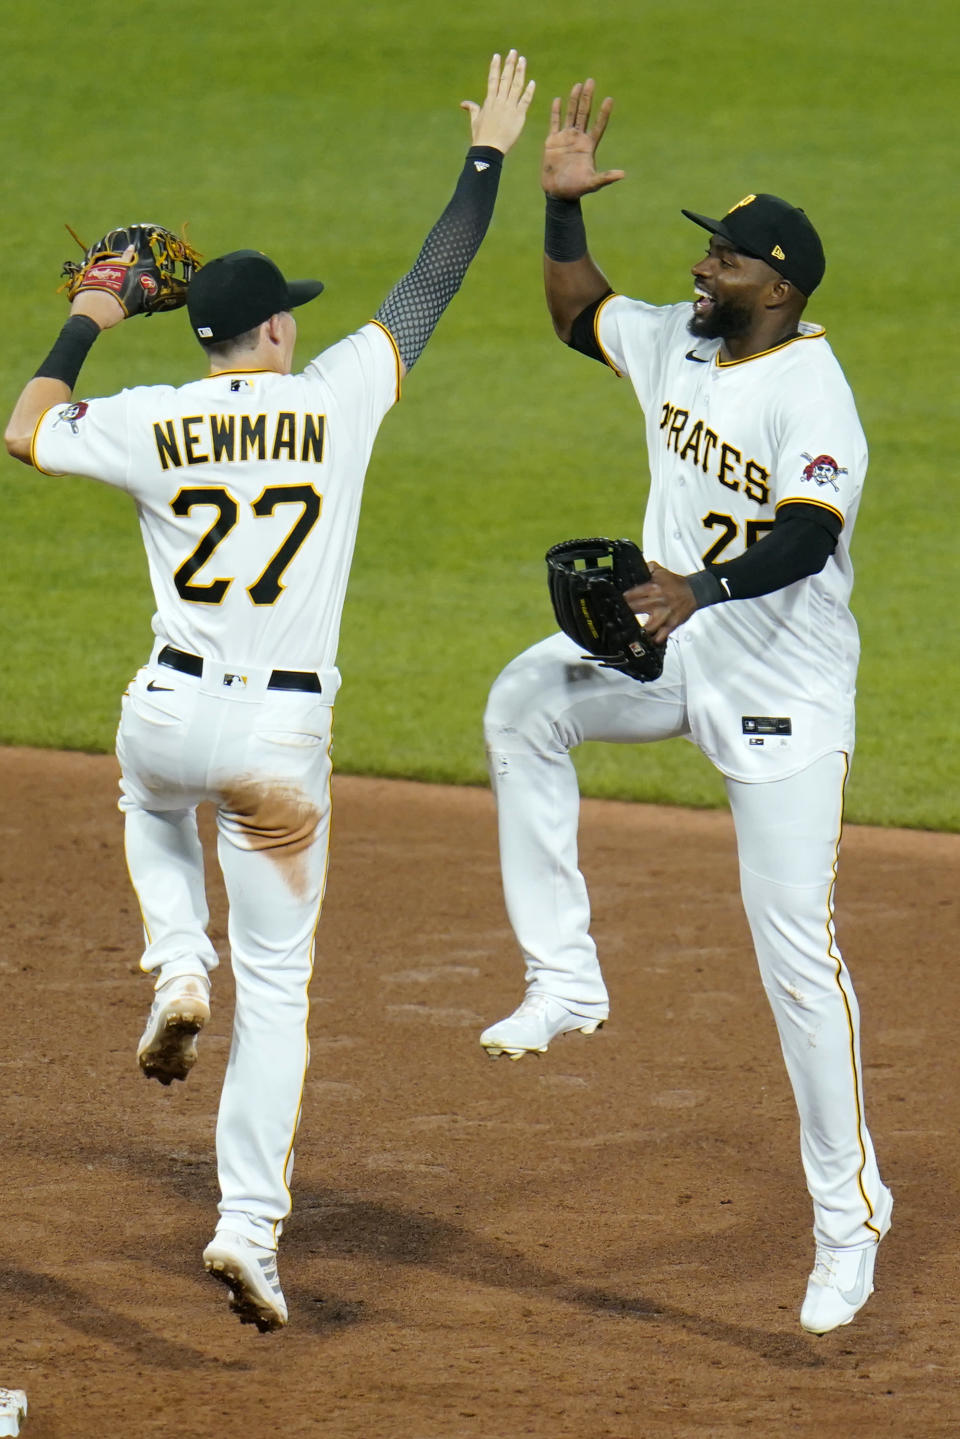 Pittsburgh Pirates' Kevin Newman, left, celebrates with Gregory Polanco, right, after getting the final out of a baseball game against the Chicago White Sox in Pittsburgh, Tuesday, June 22, 2021. (AP Photo/Gene J. Puskar)